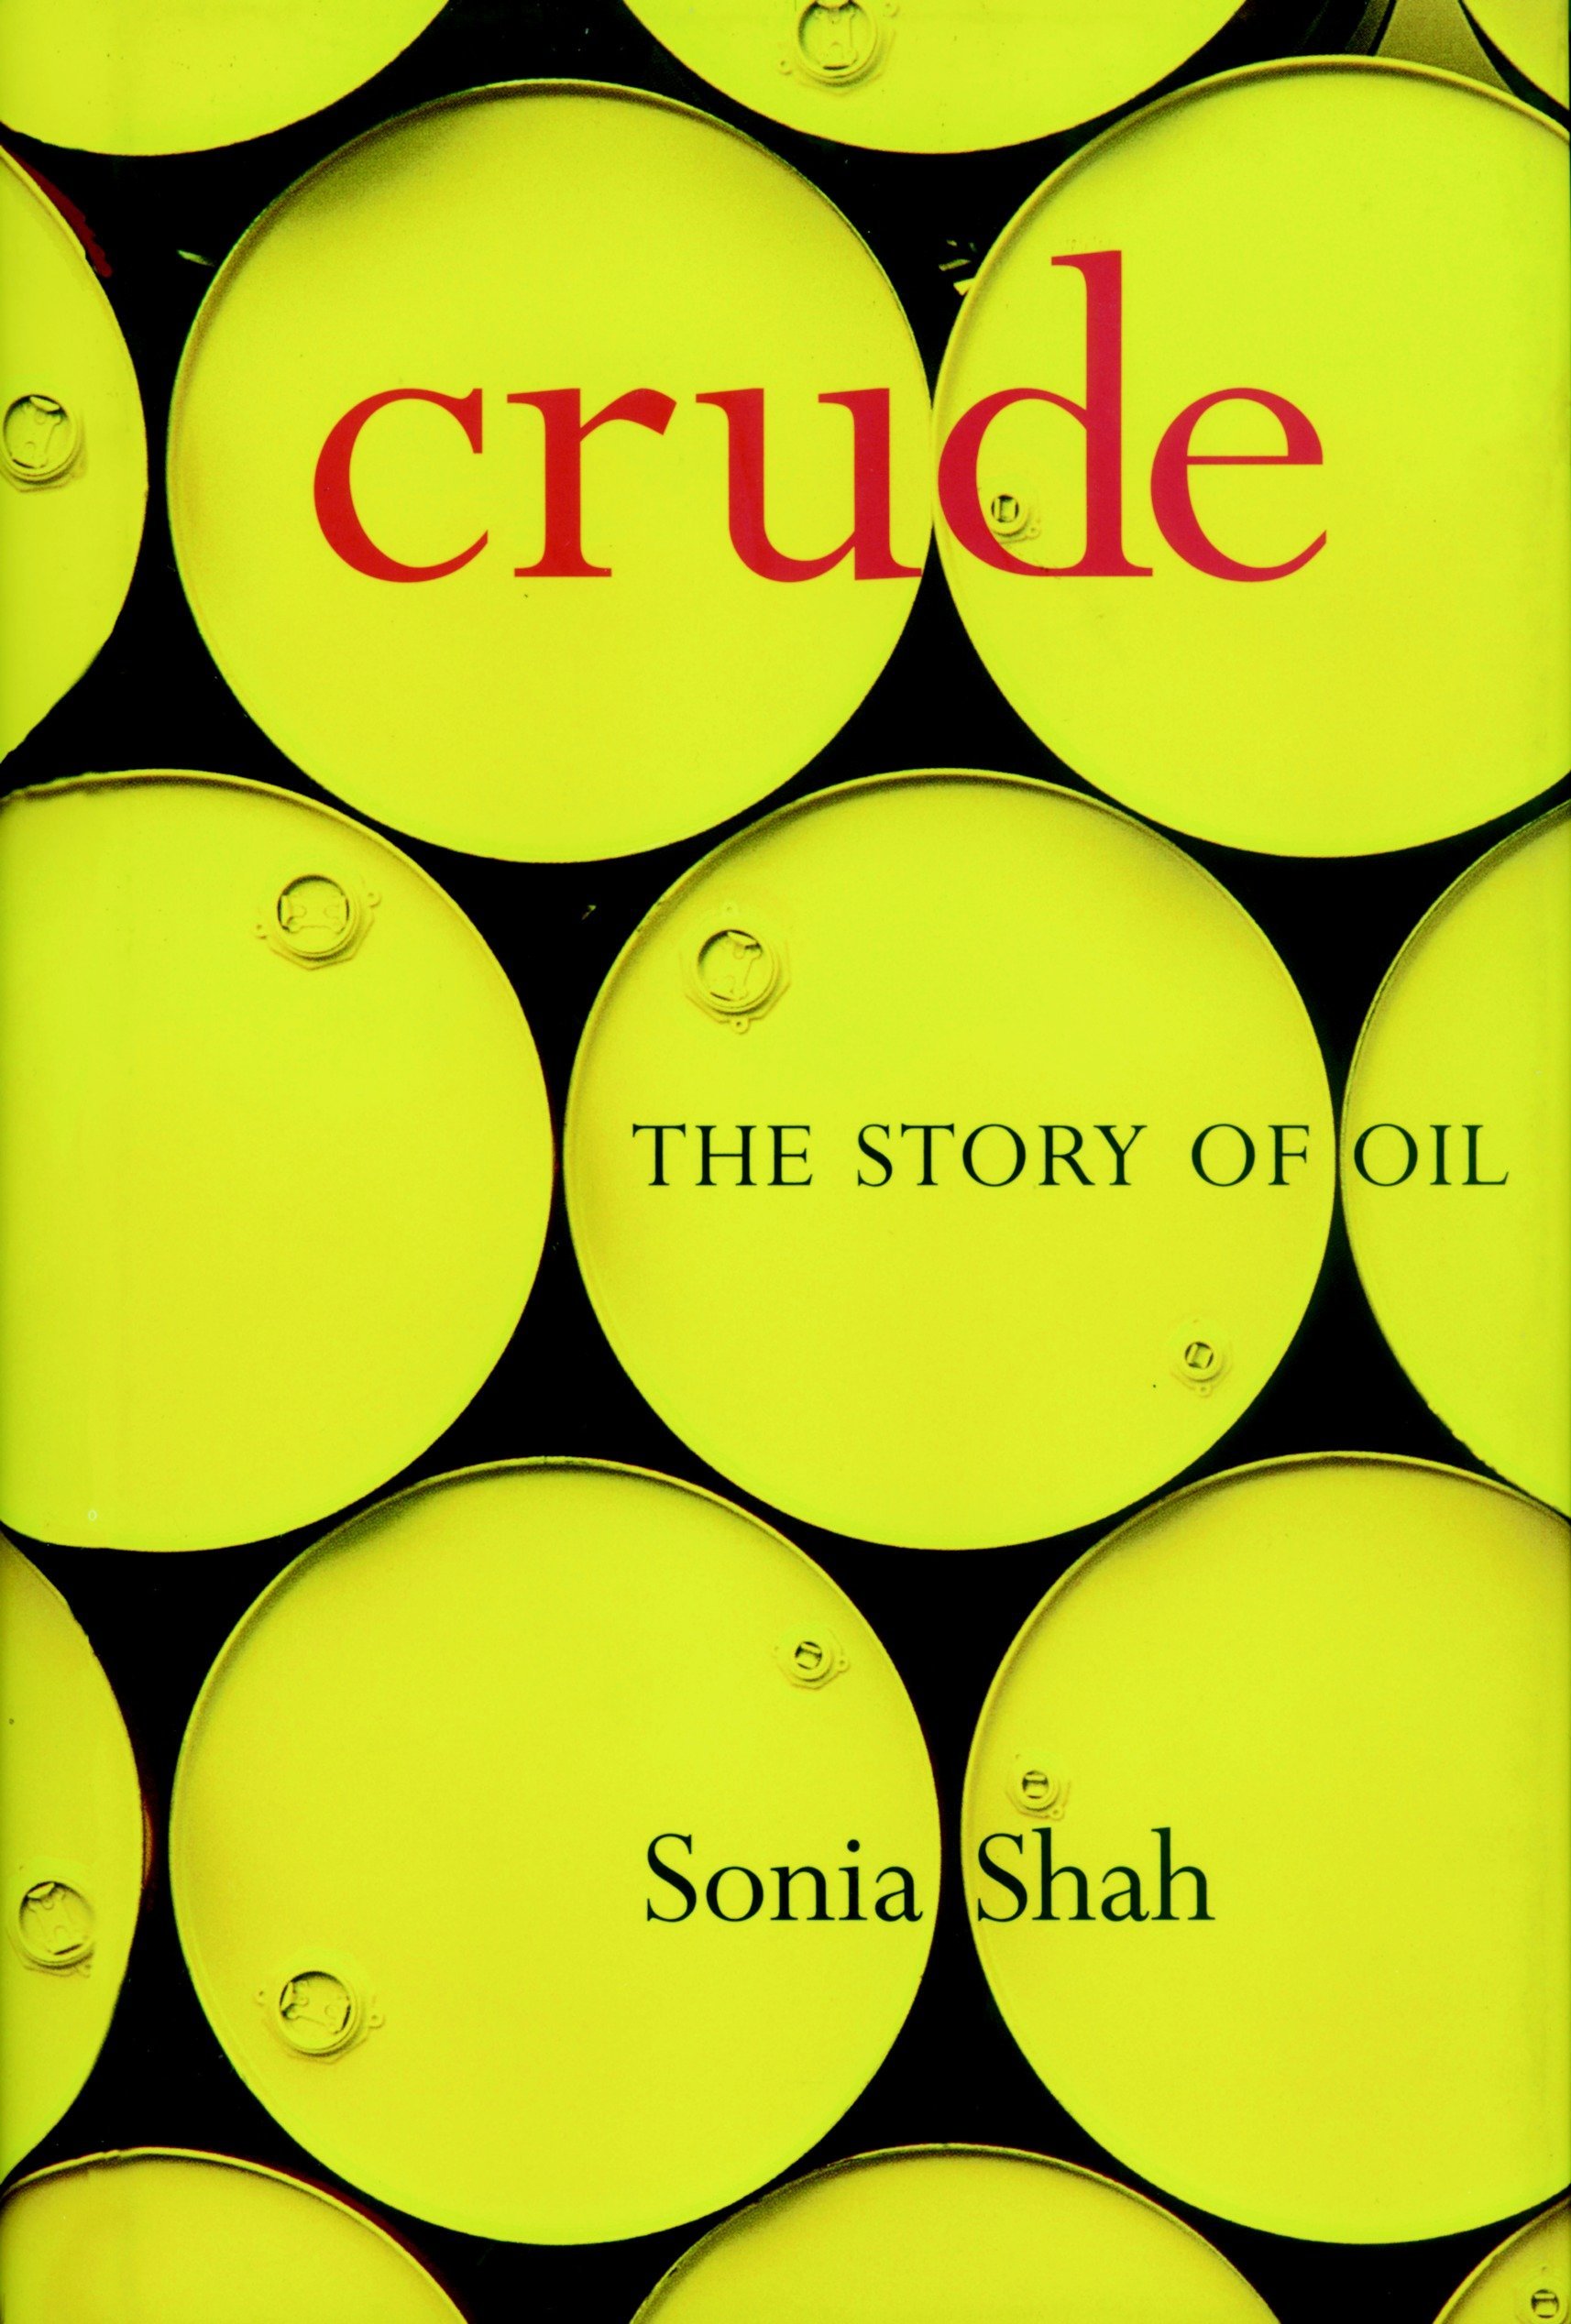 book cover crude by sonia shah